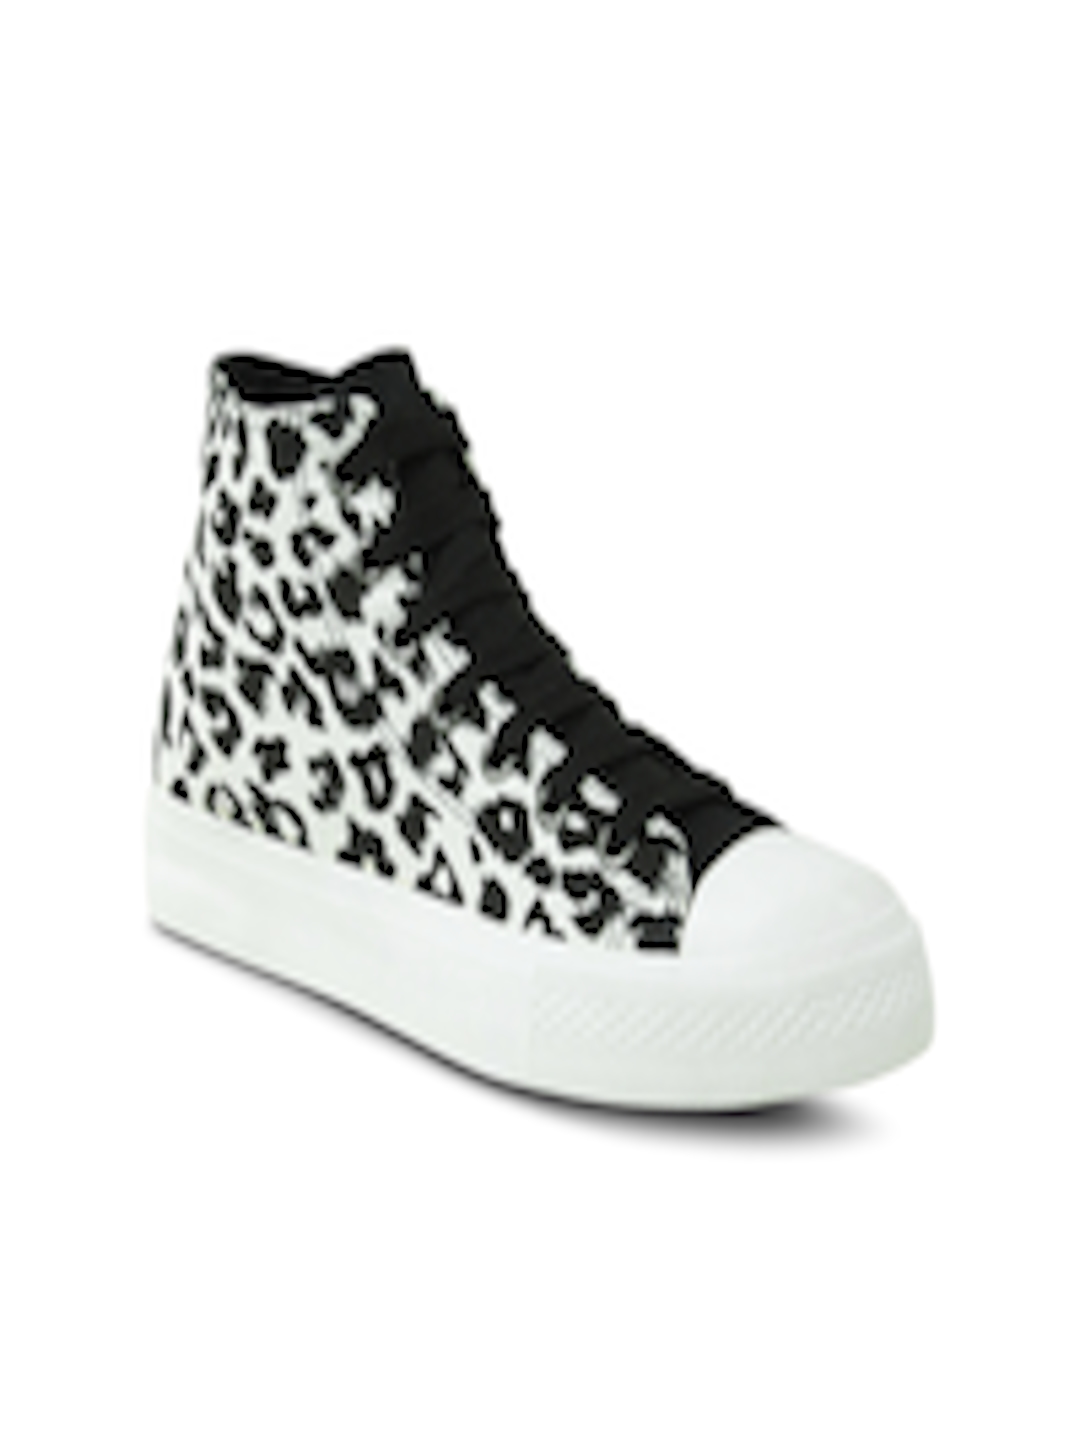 Buy Get Glamr Women Black & White Printed Casual Shoes - Casual Shoes ...